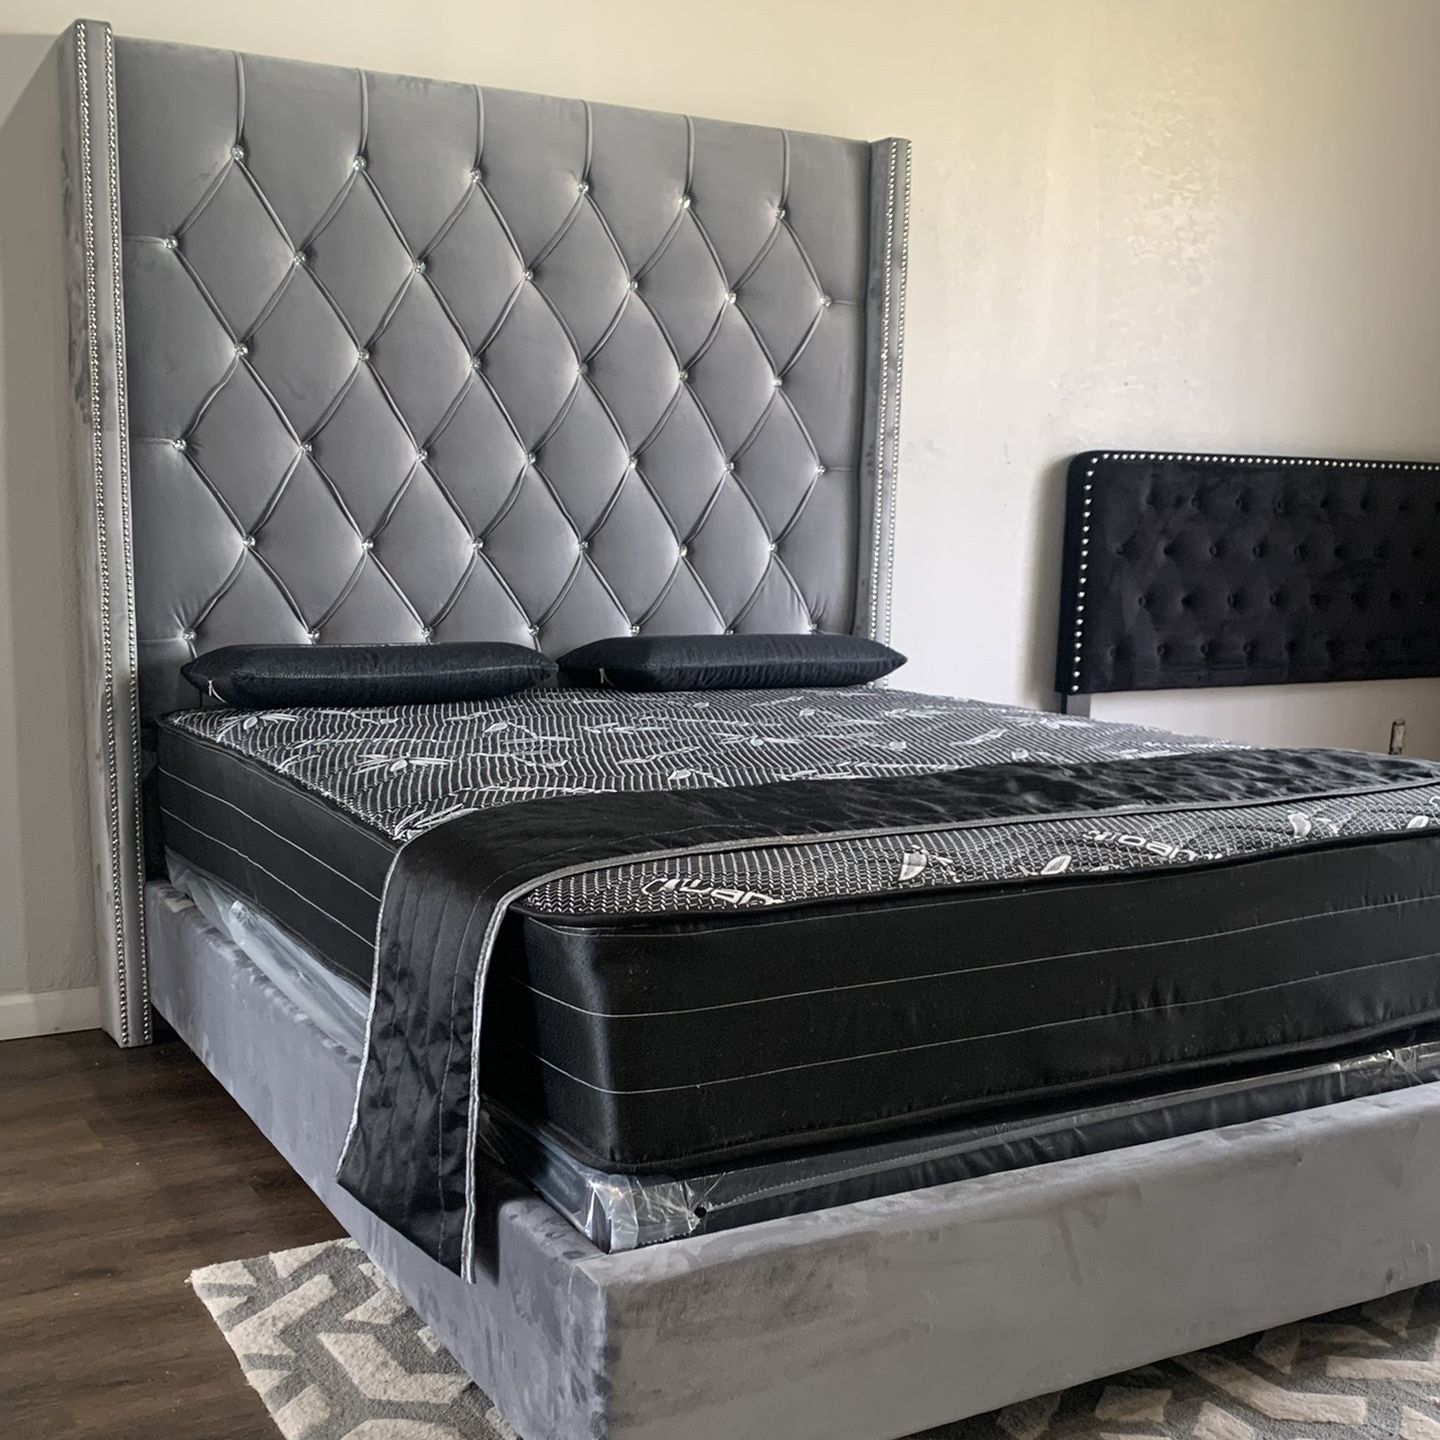 King & Queen Sizes Available/ Complete Bed Frame With Mattress & Box Spring